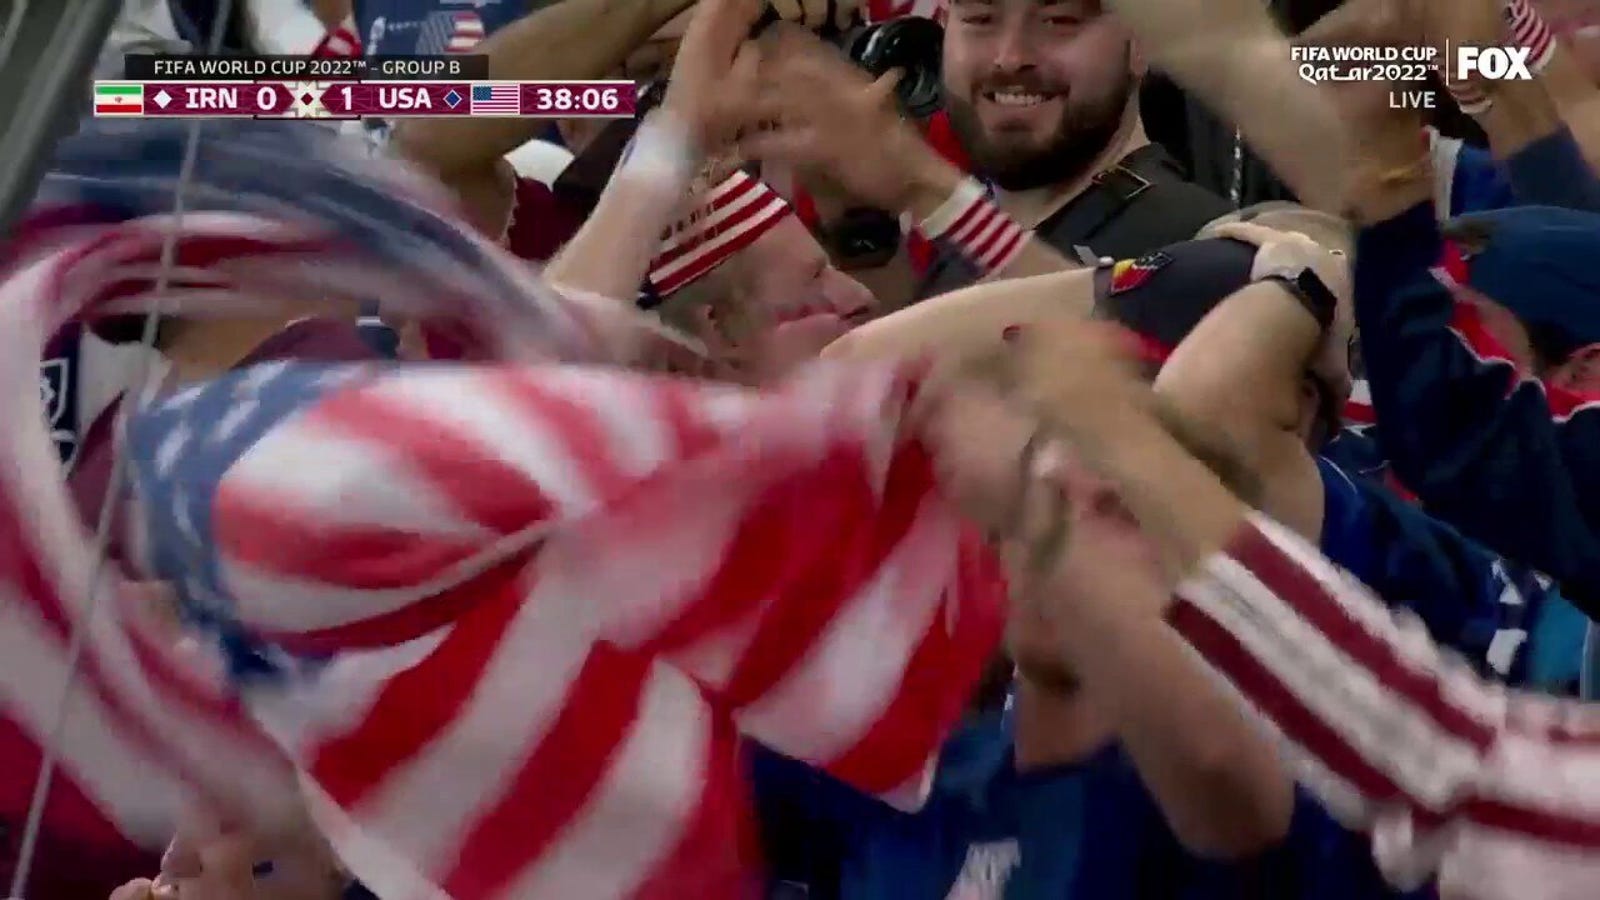 American Christian Pulisic scores a goal against Iran in the 38th minute 